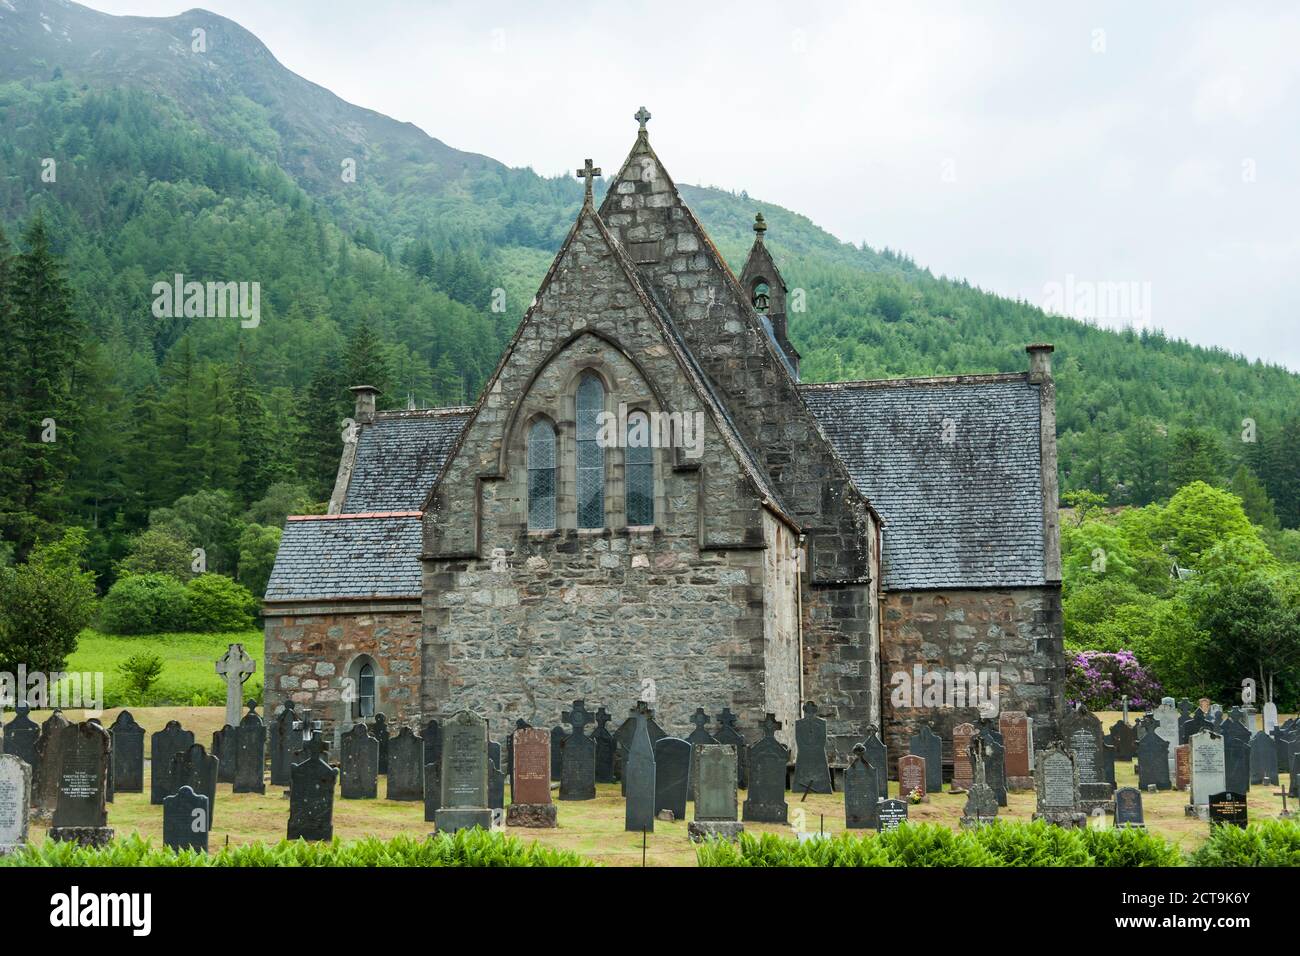 UK, Scotland, Glen Coe, Ballachulish, view to St John's church with tombstones of cemetery in front Stock Photo